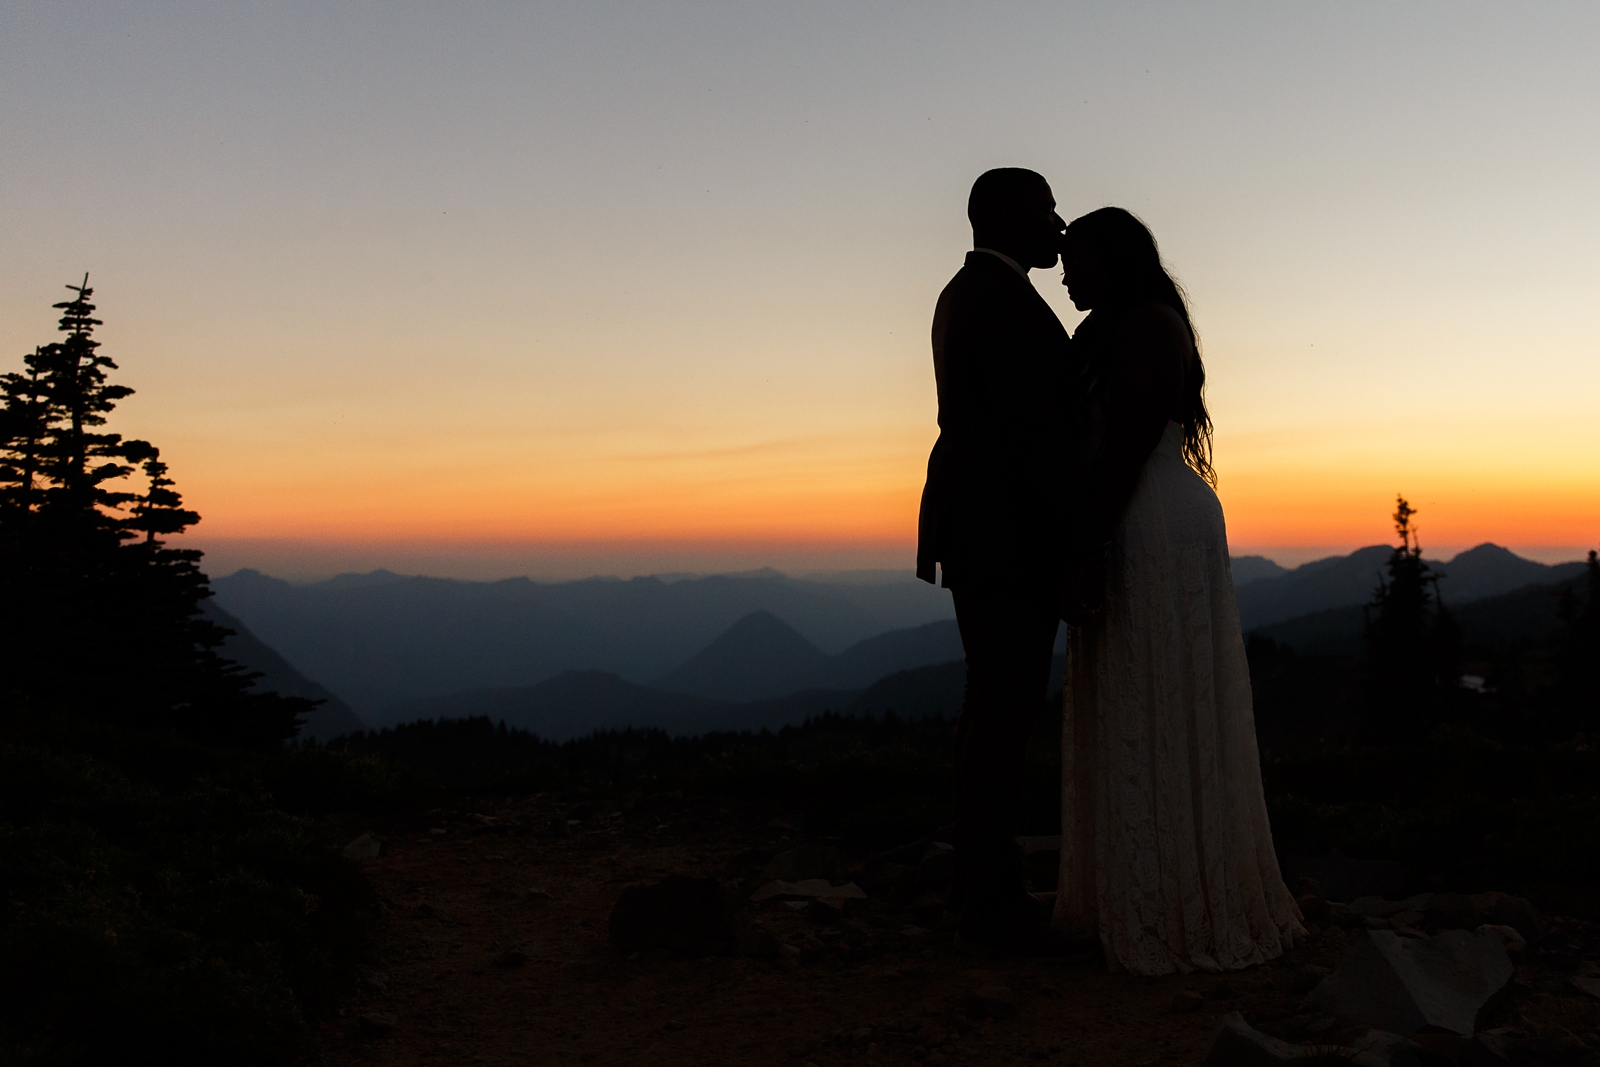 An adventurous young couple embrace in front of the sunset at Mount Rainier National Park during their hiking elopement.